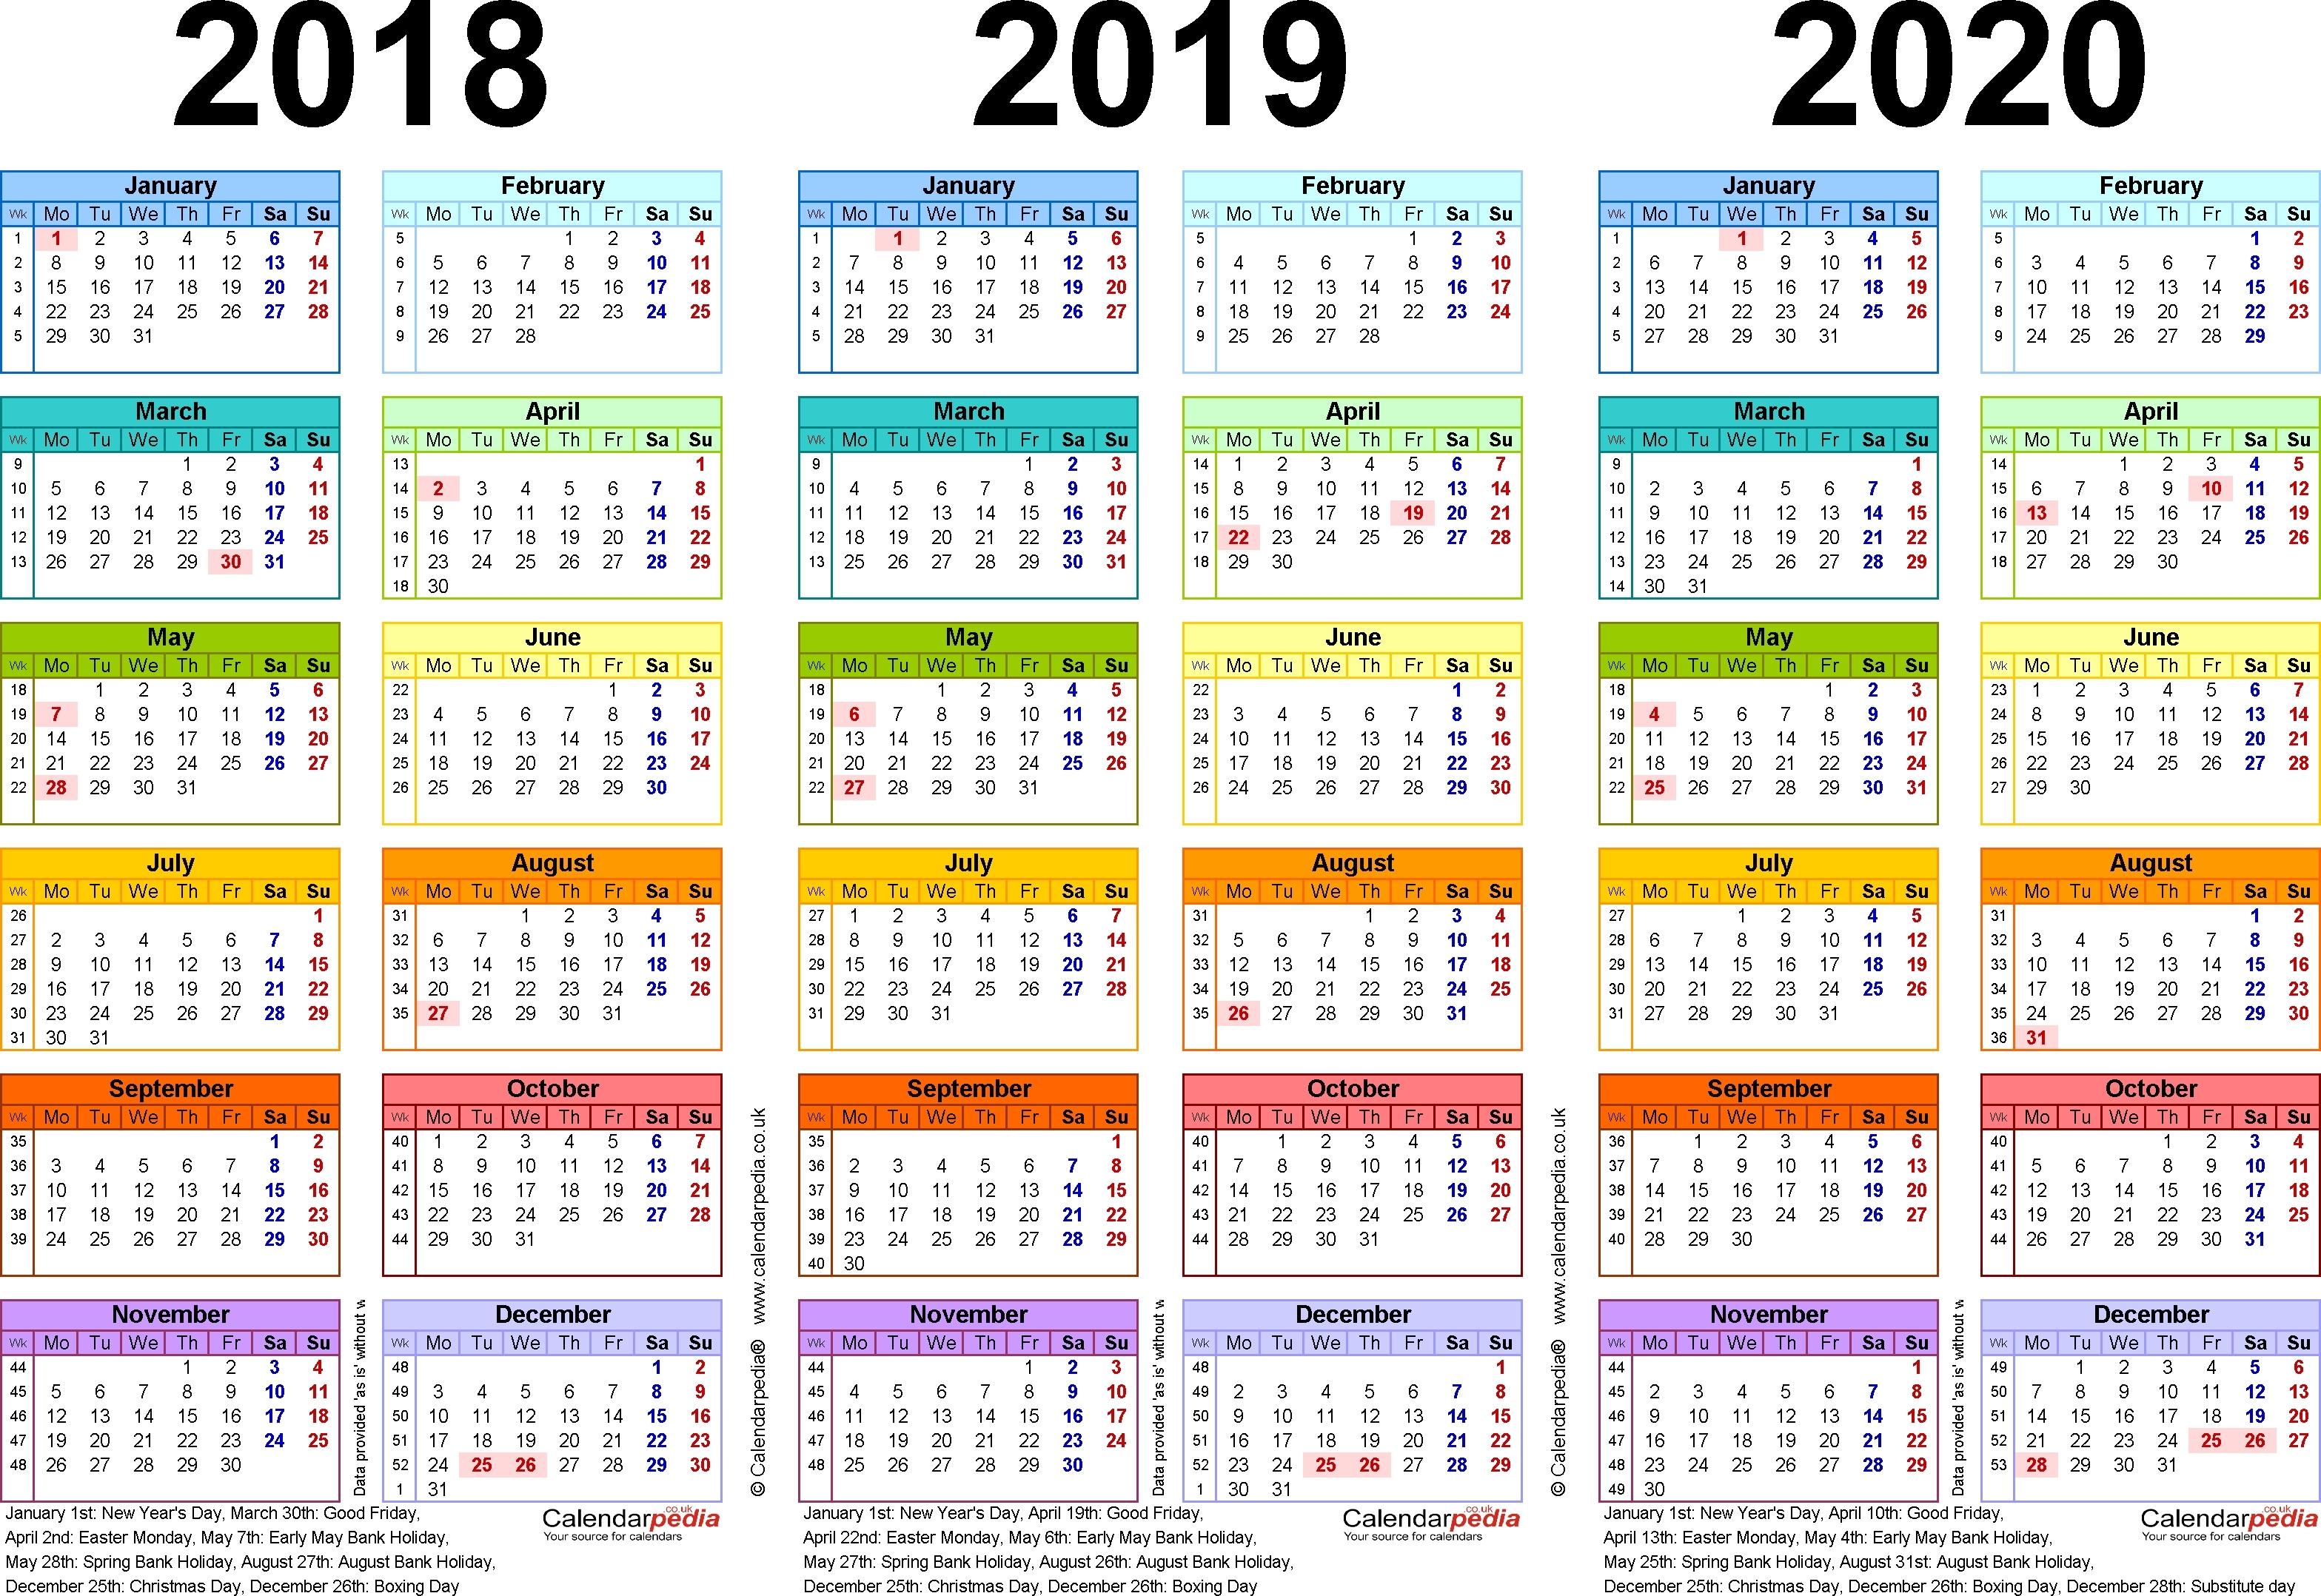 Exceptional 2020 Calendar South Africa • Printable Blank-2020 Calendar With Public Holidays And School Holidays South Africa